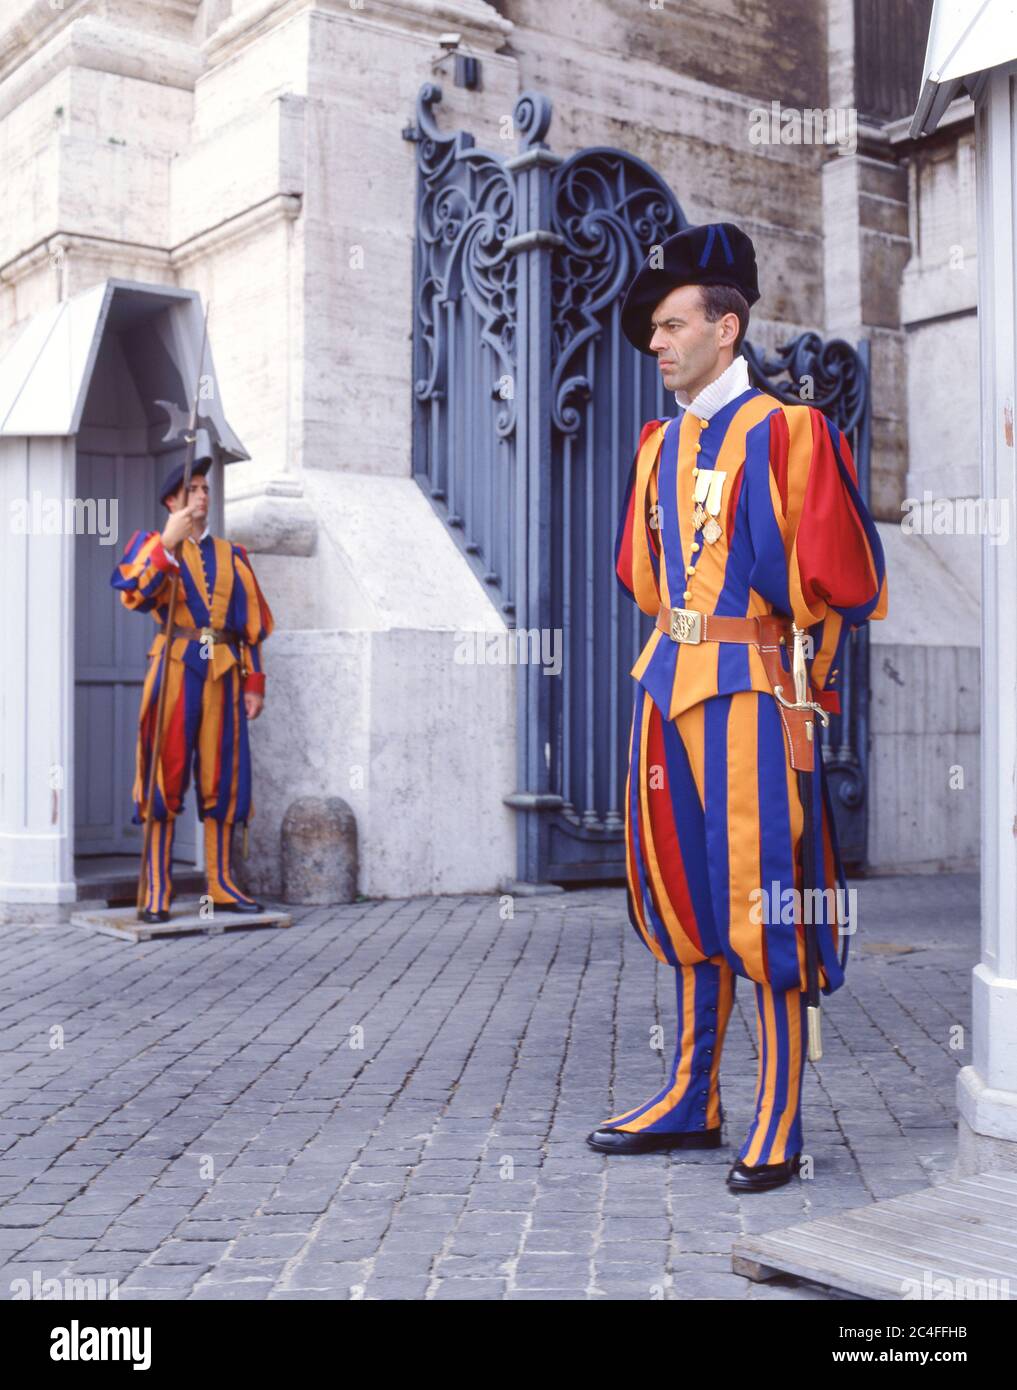 Pontficial Swiss guards in traditional uniform outside Vatican City, St Peter's Square, Rome (Roma), Lazio Region, Italy Stock Photo